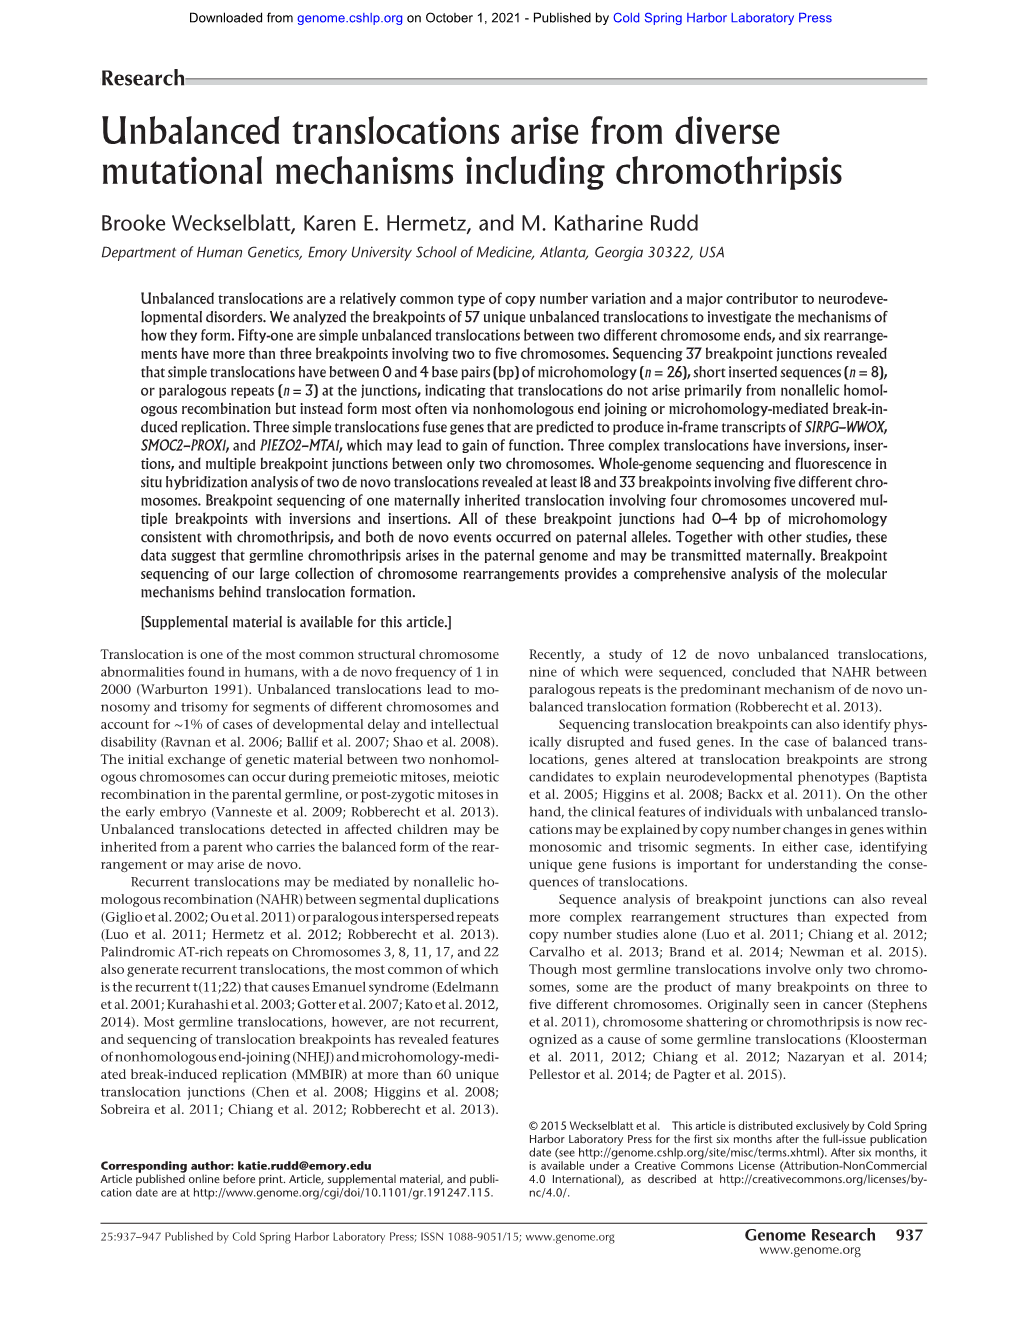 Unbalanced Translocations Arise from Diverse Mutational Mechanisms Including Chromothripsis